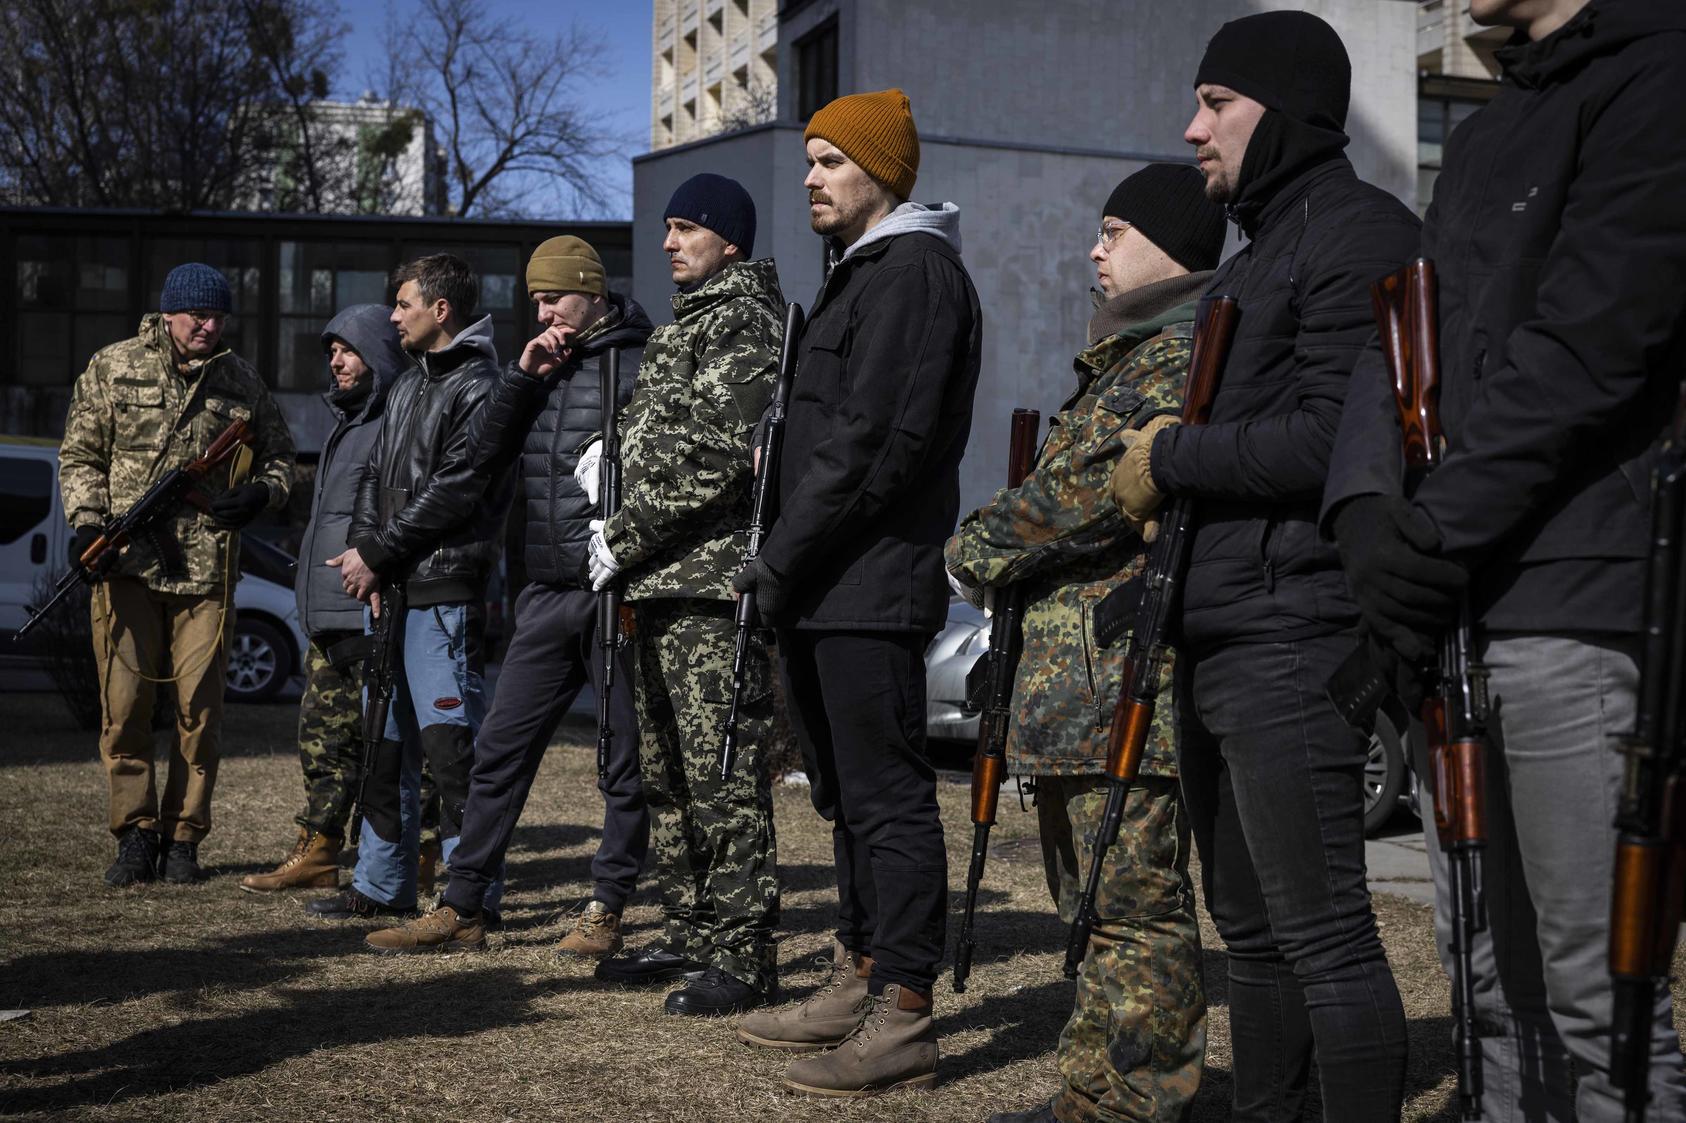 Volunteers with the Territorial Defense Forces near Kyiv, Ukraine March 20, 2022. An eventual post-conflict security challenge Ukraine will face is the need to demobilize tens of thousands of fighters who received weapons and training to fight Russia. (Ivor Prickett/The New York Times)